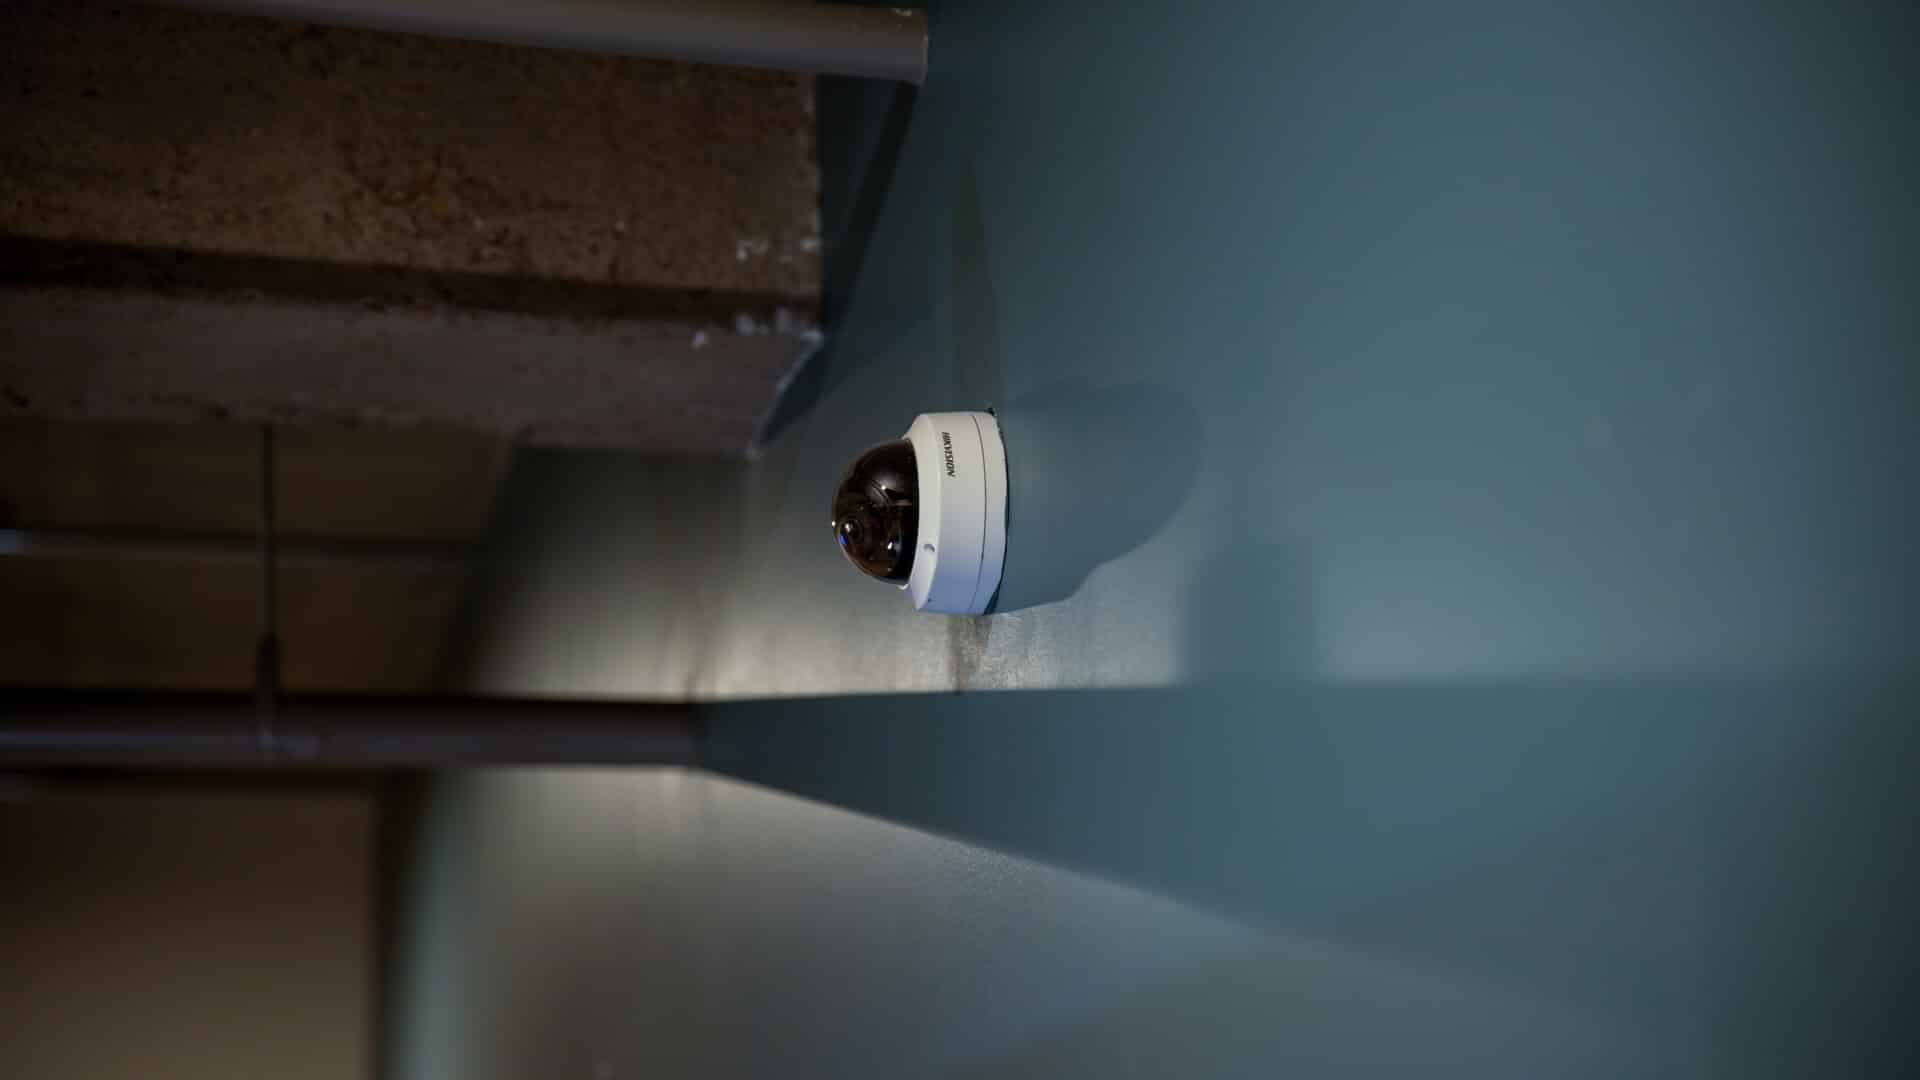 White and black wall security camera mounted on a blue exterior wall.